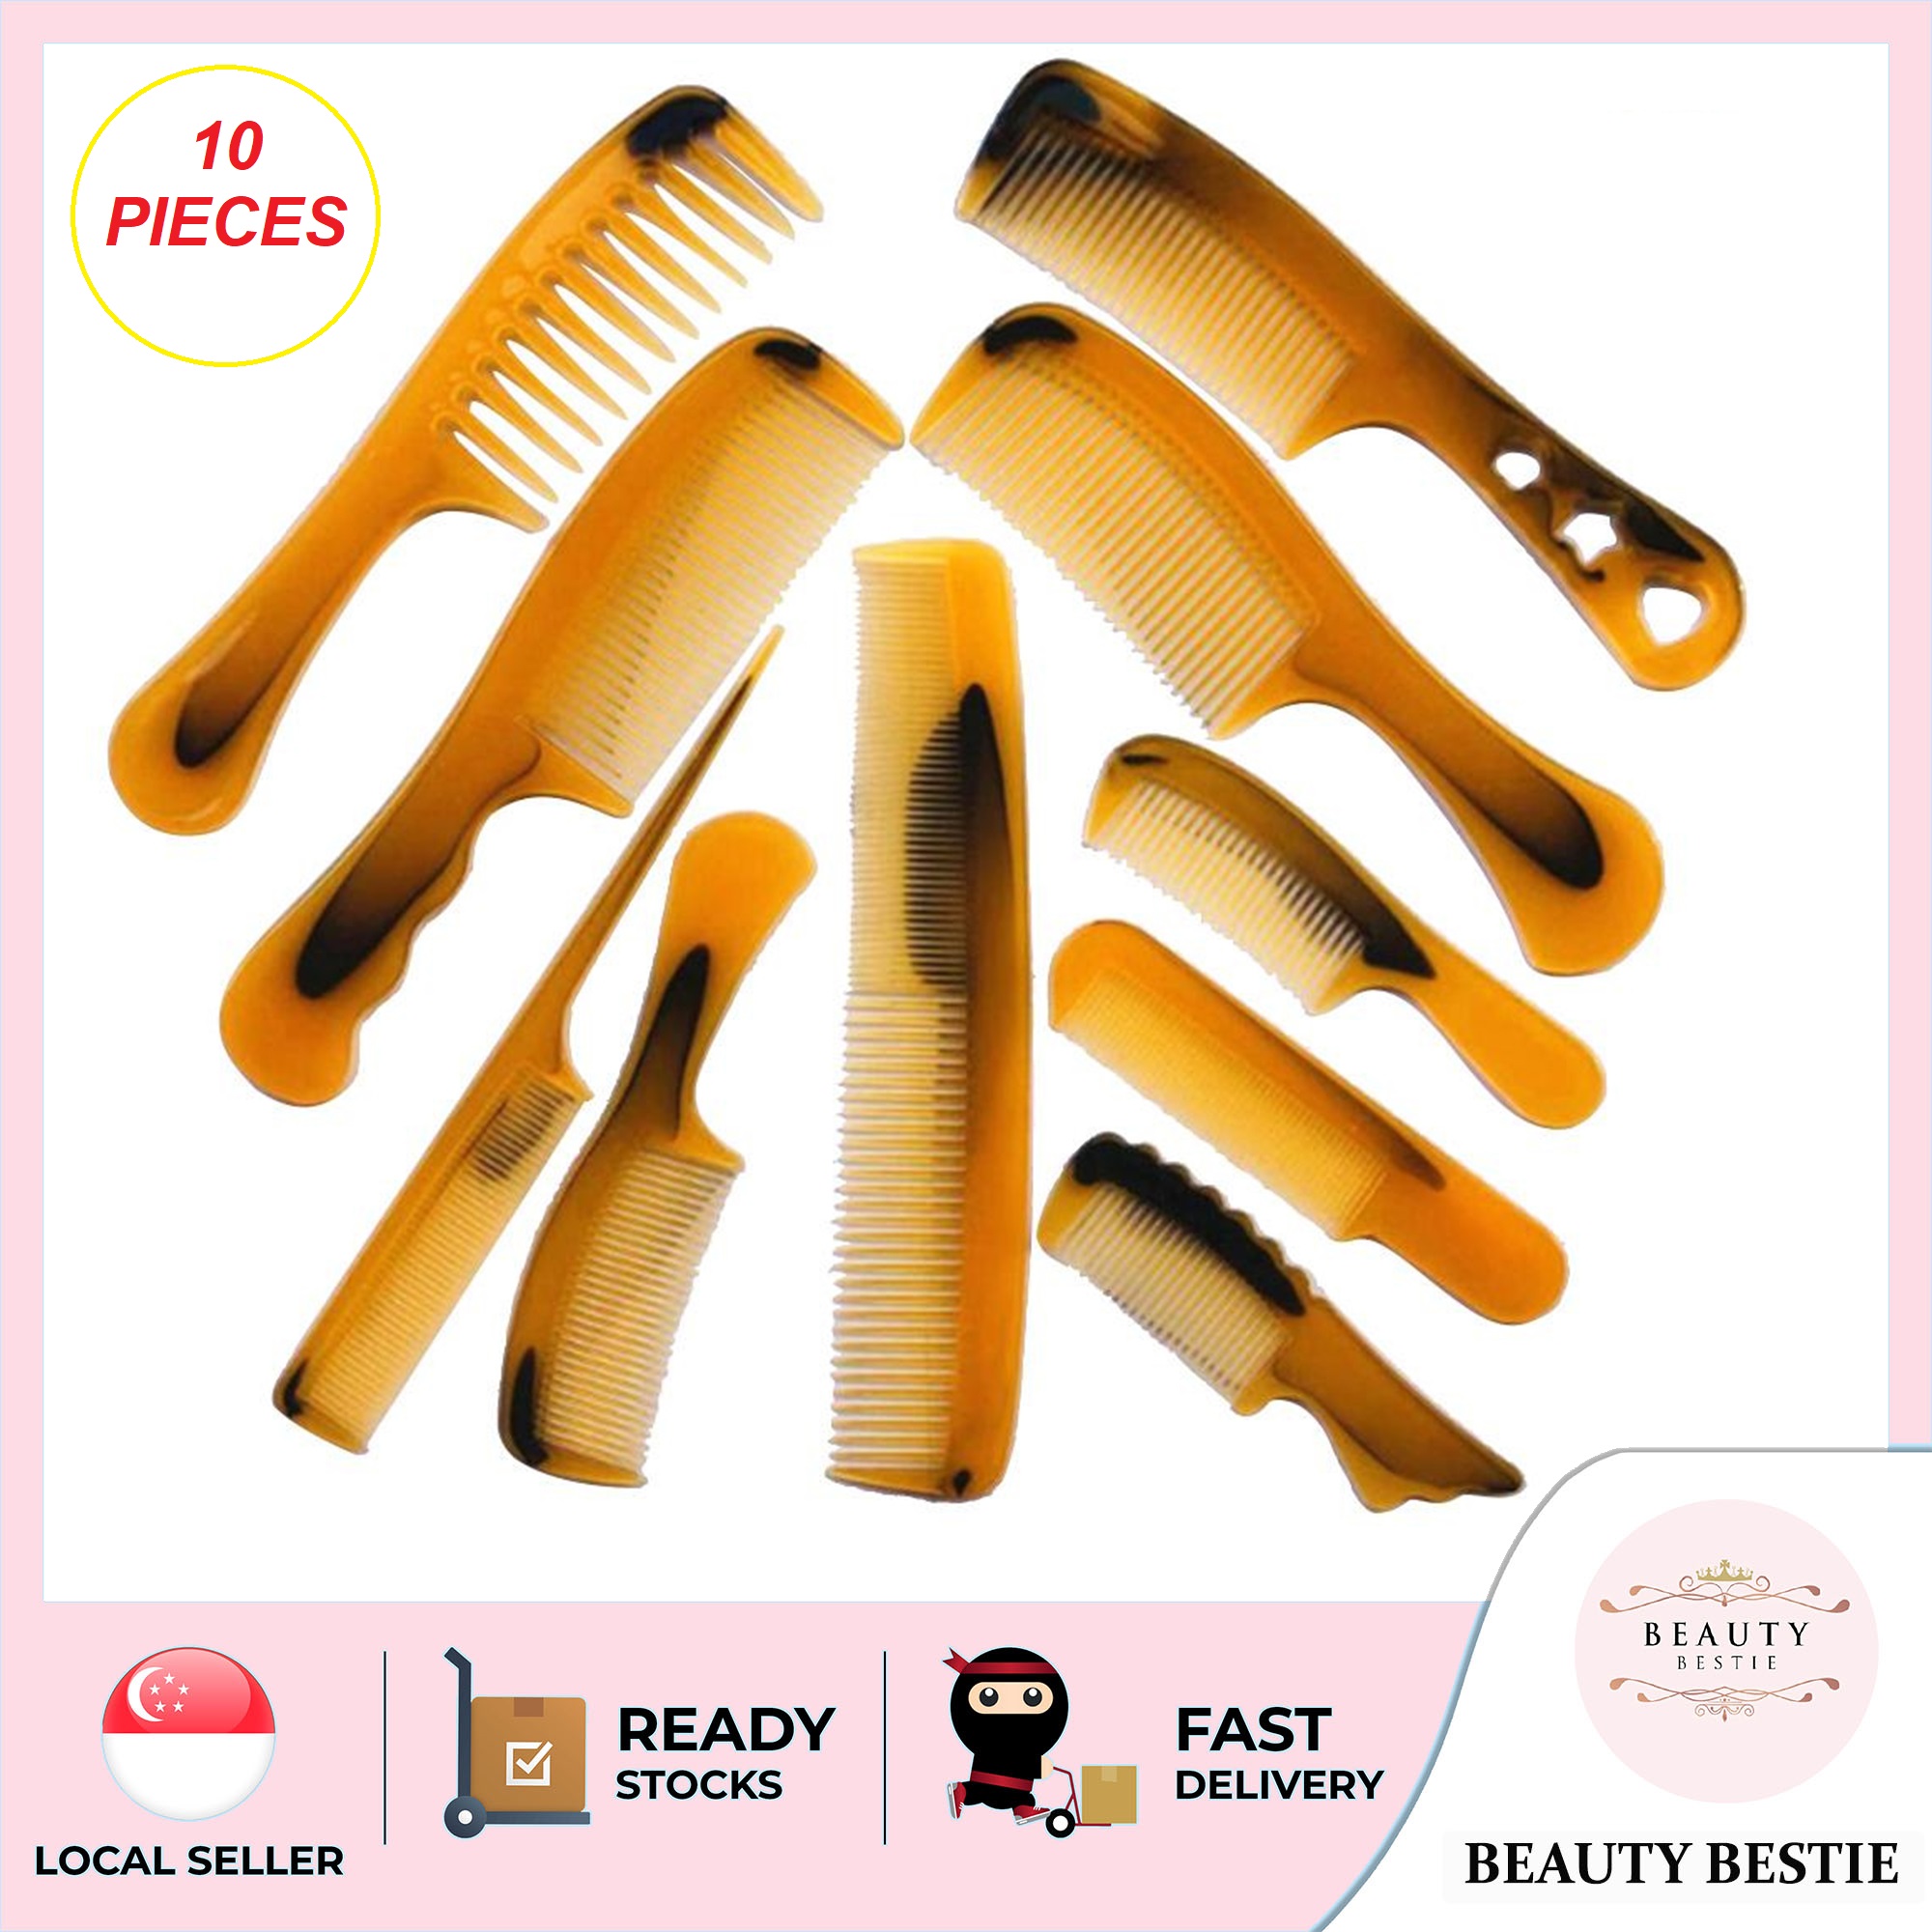 10 PIECES* HAIR COMB KIT HAIR DETANGLER BARBER STYLING COMB SET HAIR  CUTTING COMB SET SALON ANTI-STATIC STYLISTS COMB CLIP SET FOR WOMEN MEN *SG  SELLER FAST DELIVERY* | Lazada Singapore